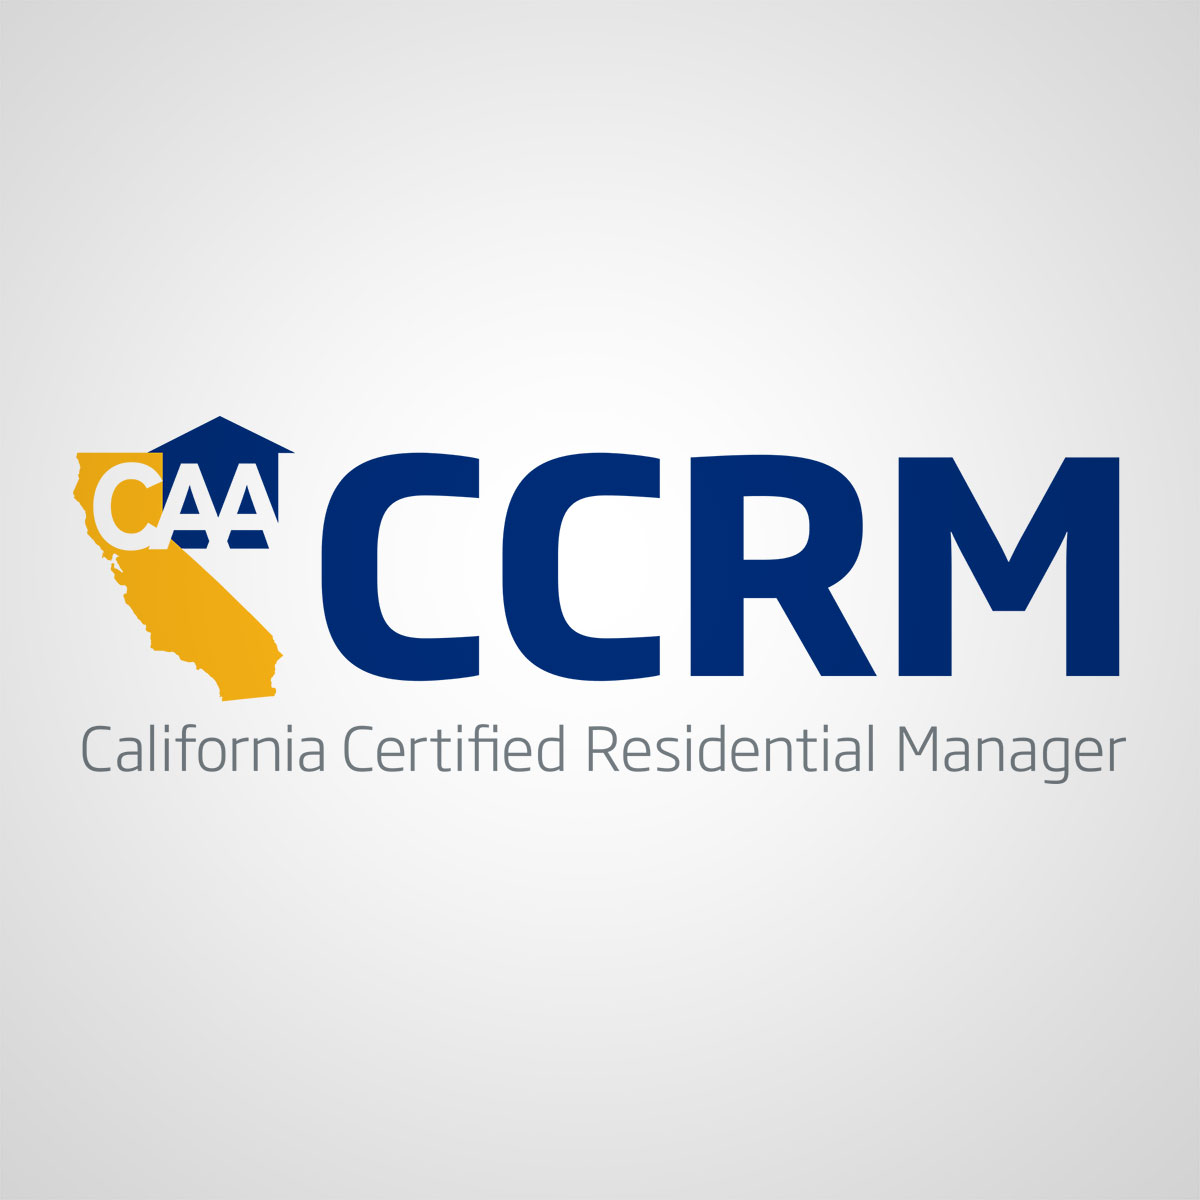 CCRM Fall 2017 Series